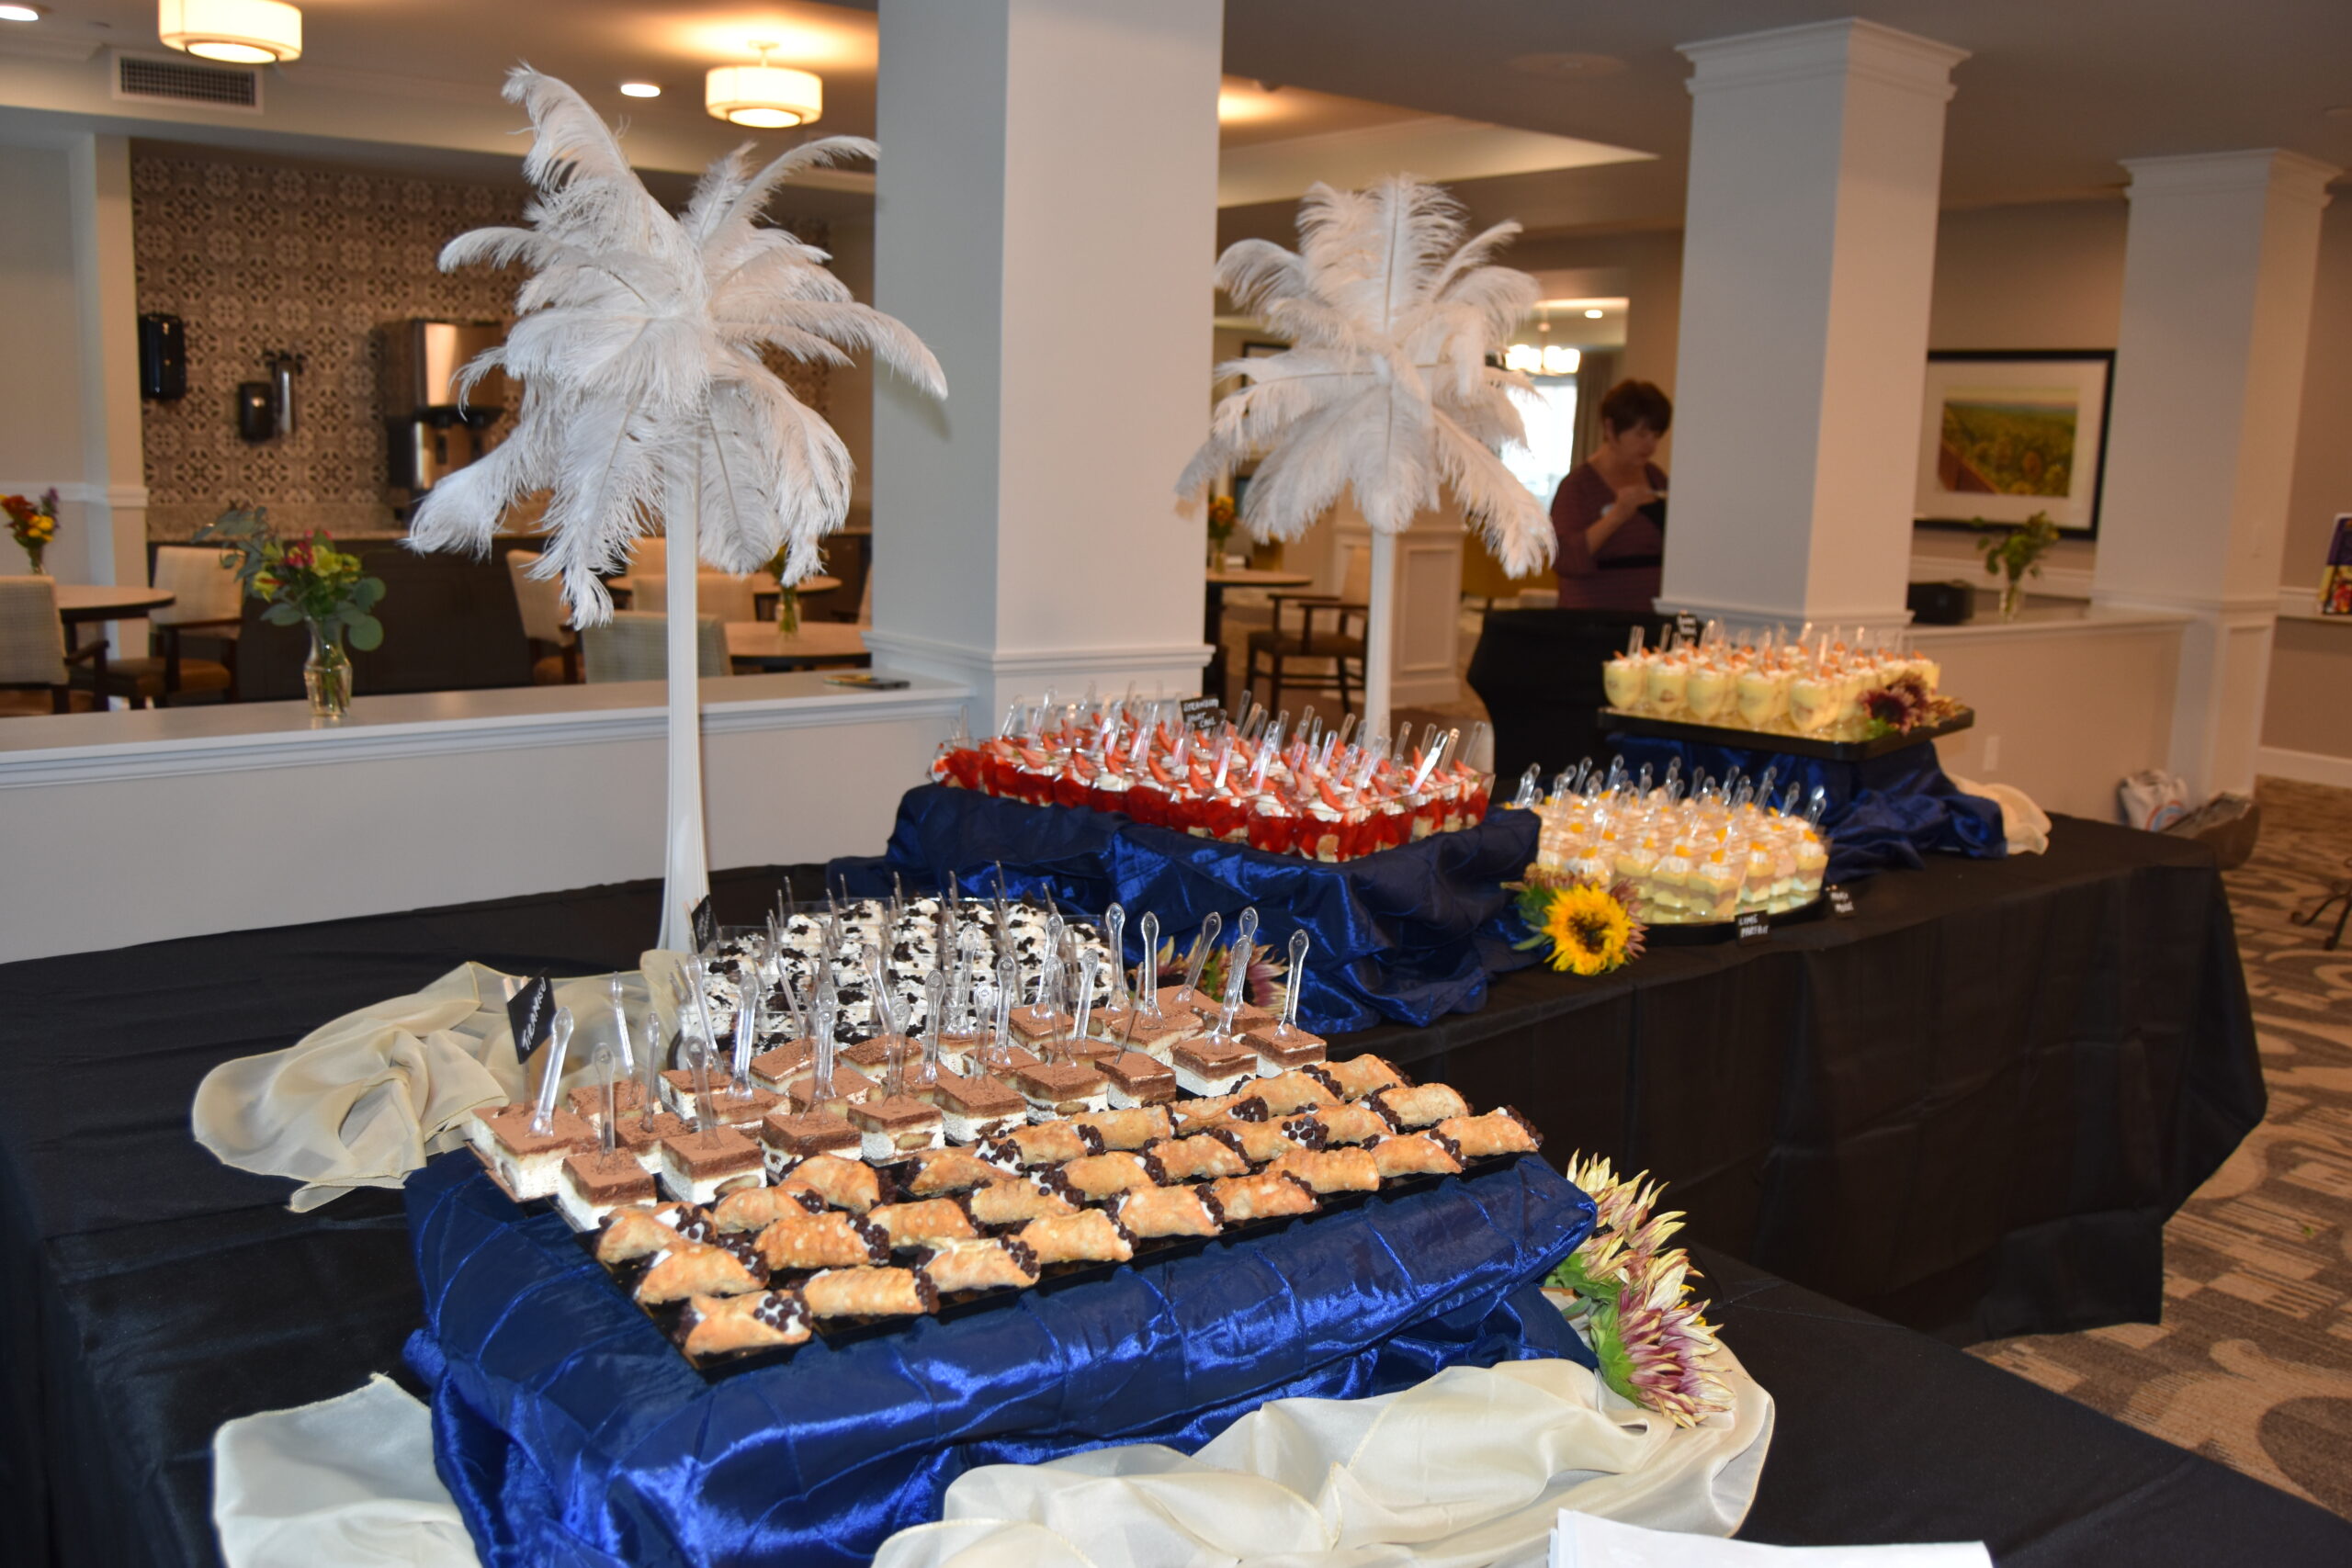 desserts cups with spoons displayed on blue cloths